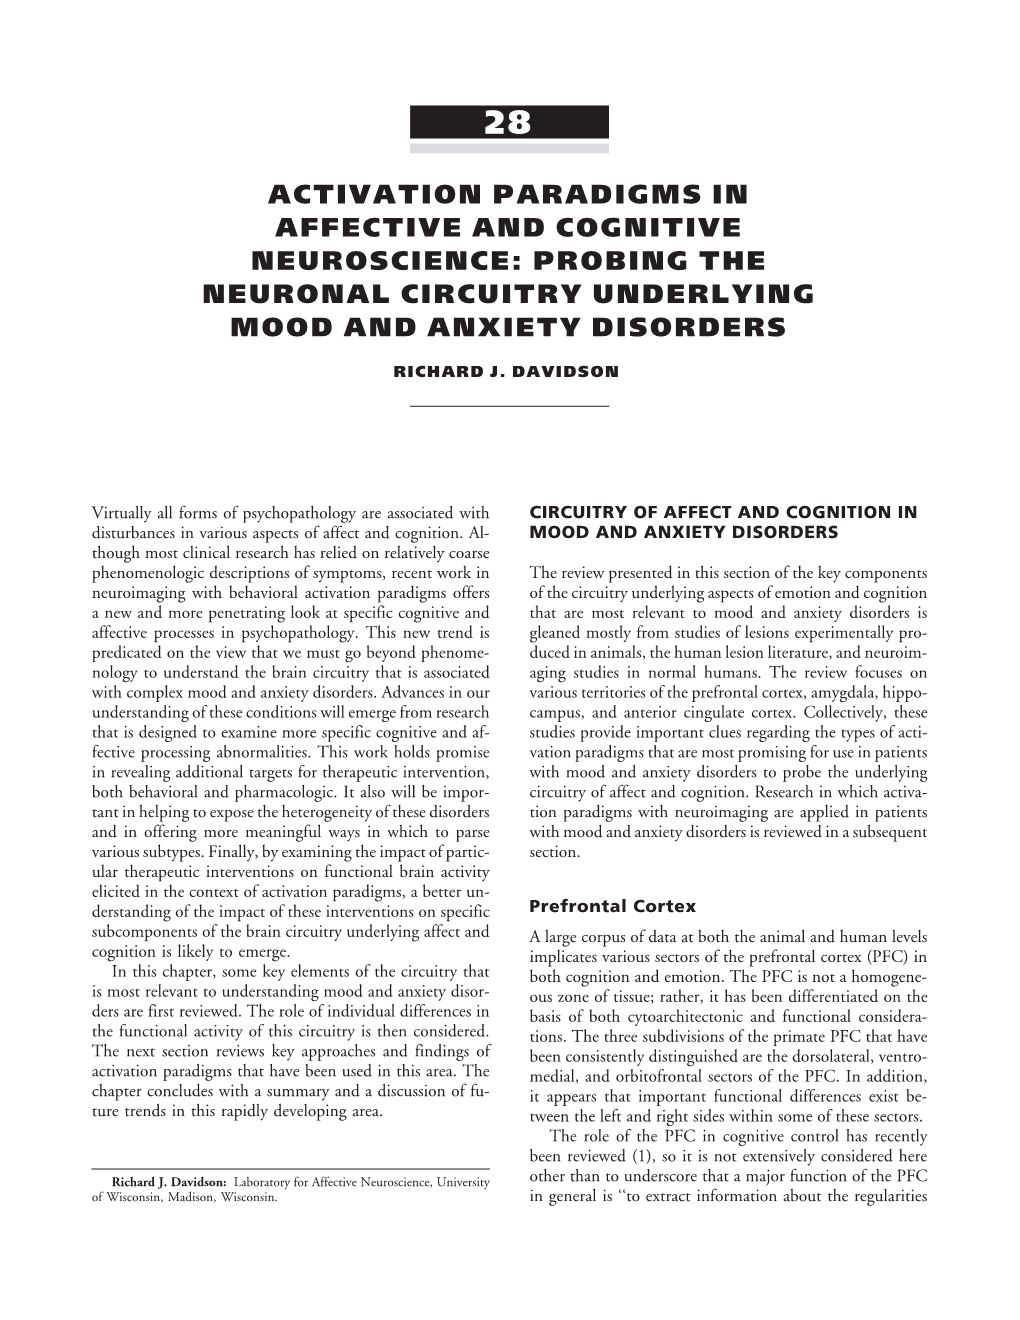 Activation Paradigms in Affective and Cognitive Neuroscience: Probing the Neuronal Circuitry Underlying Mood and Anxiety Disorders